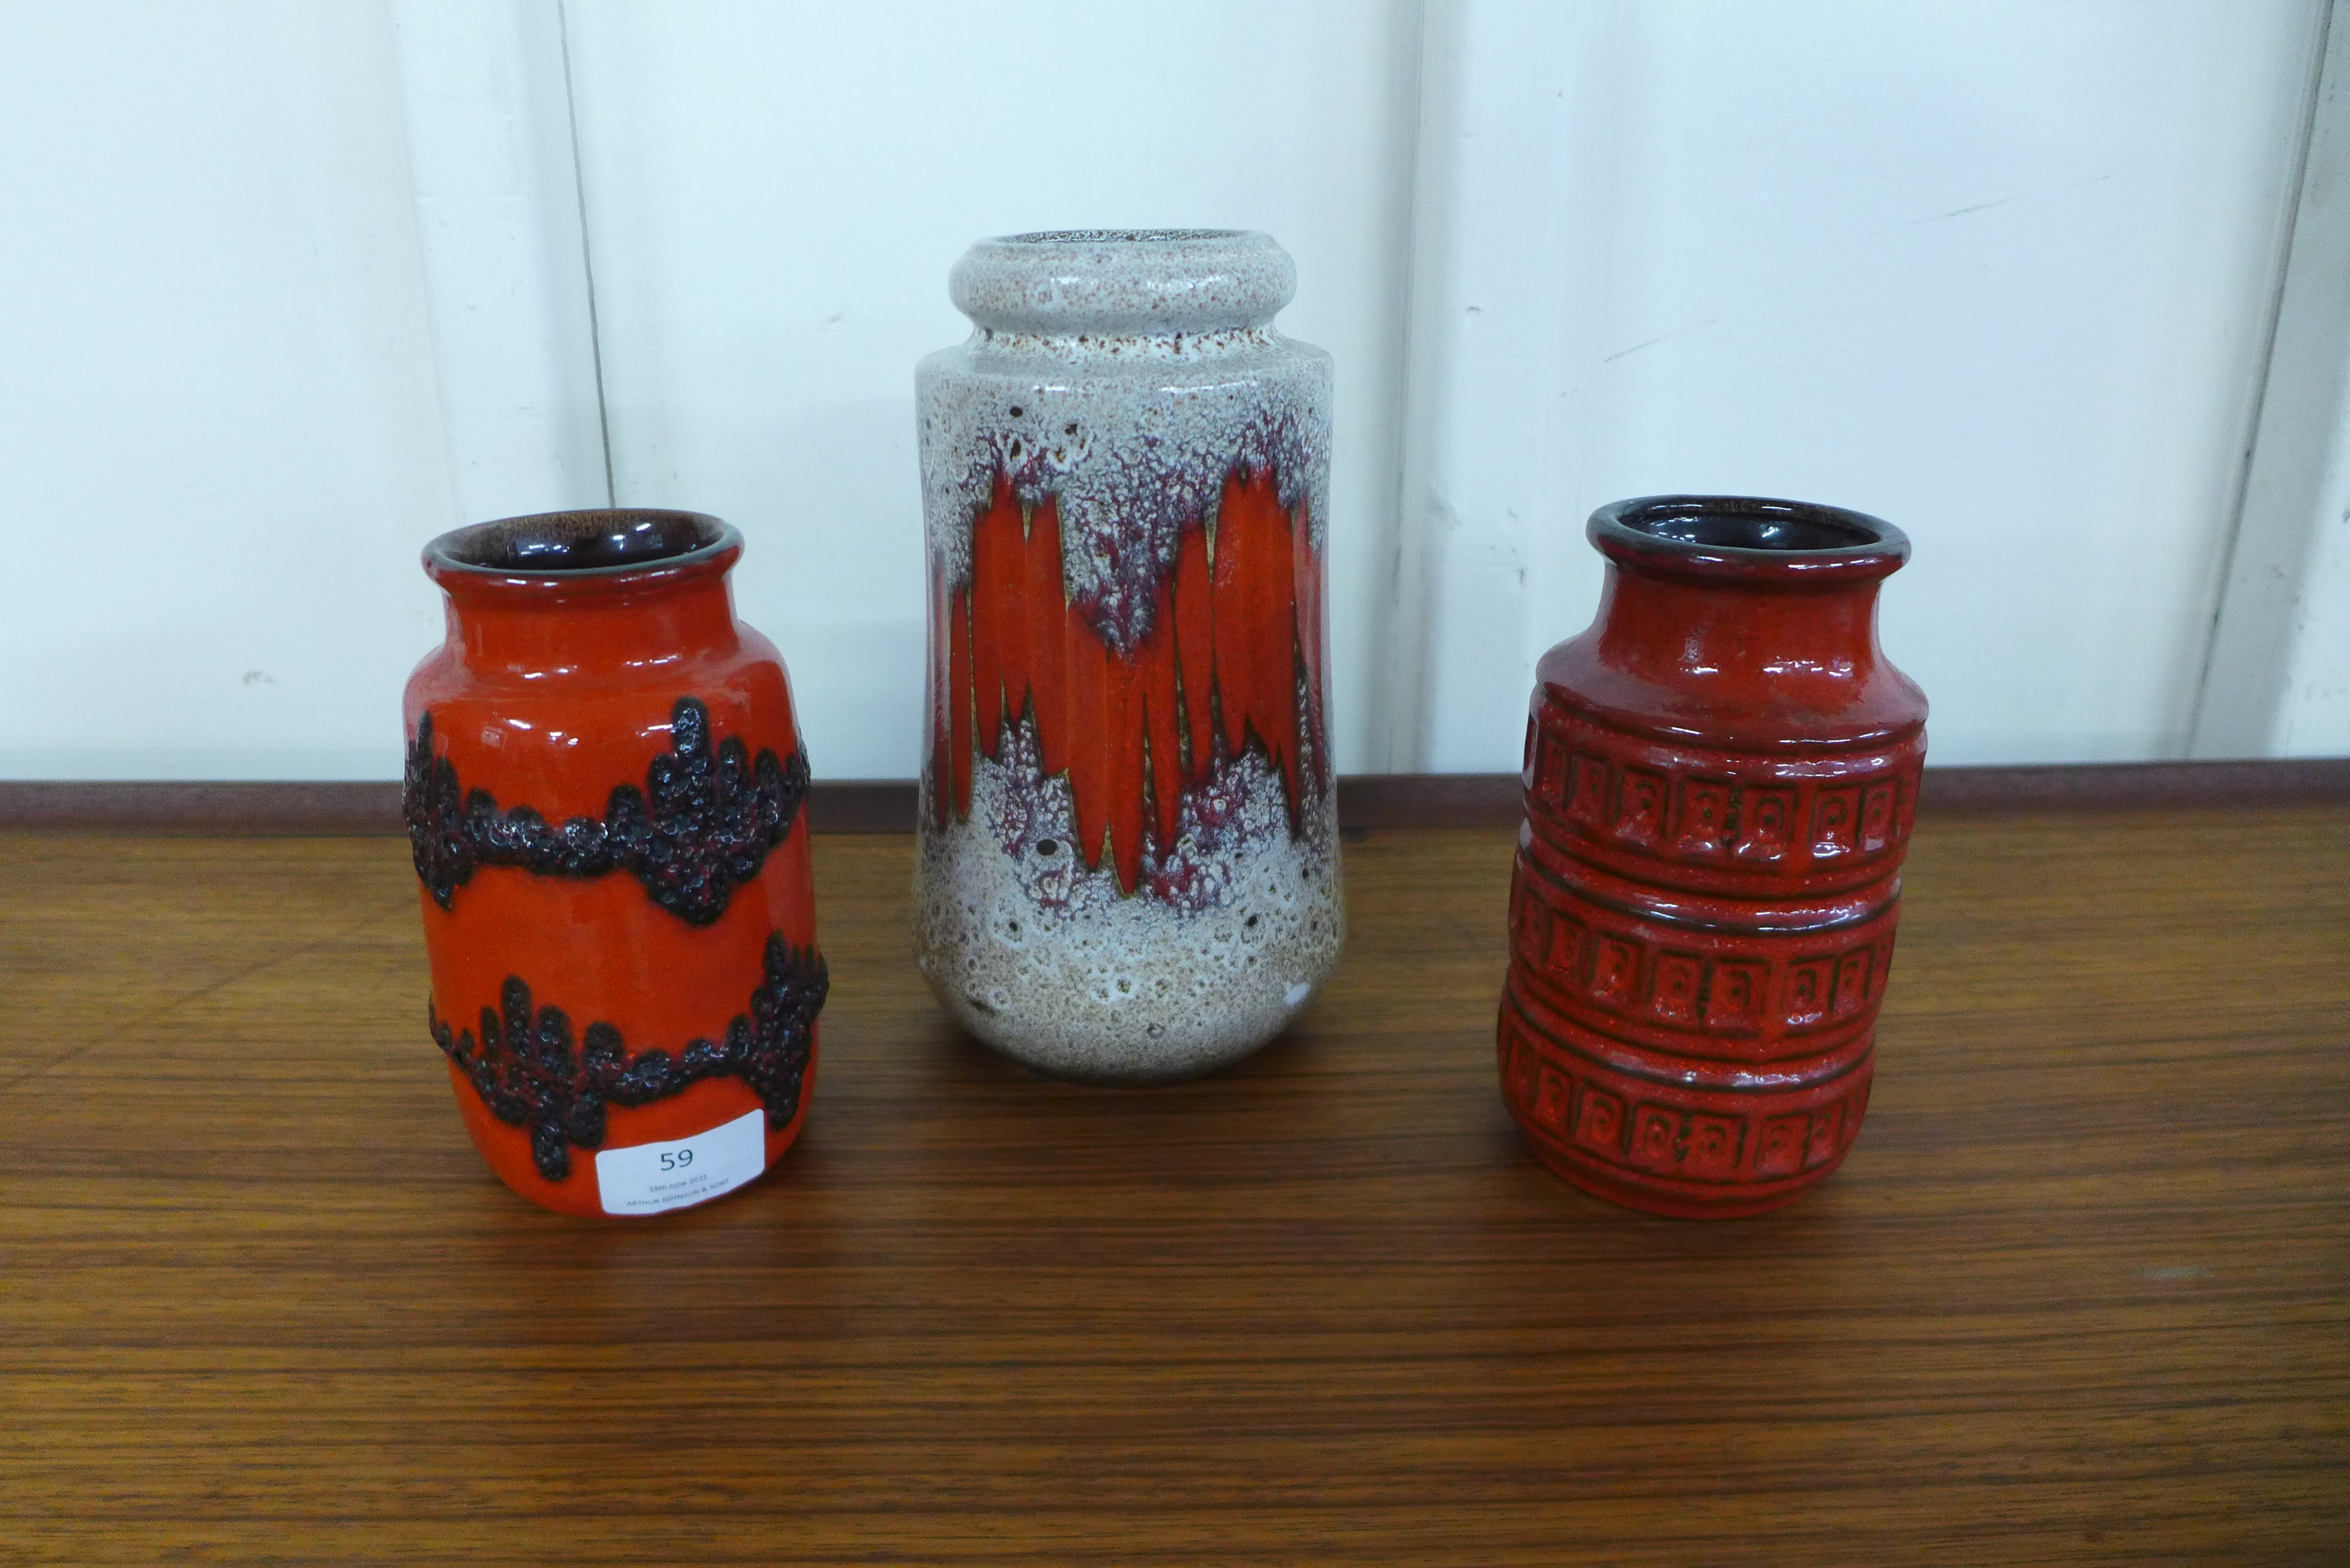 A West German Scheurich zig-zag vase, a West German fat lava vase and one other